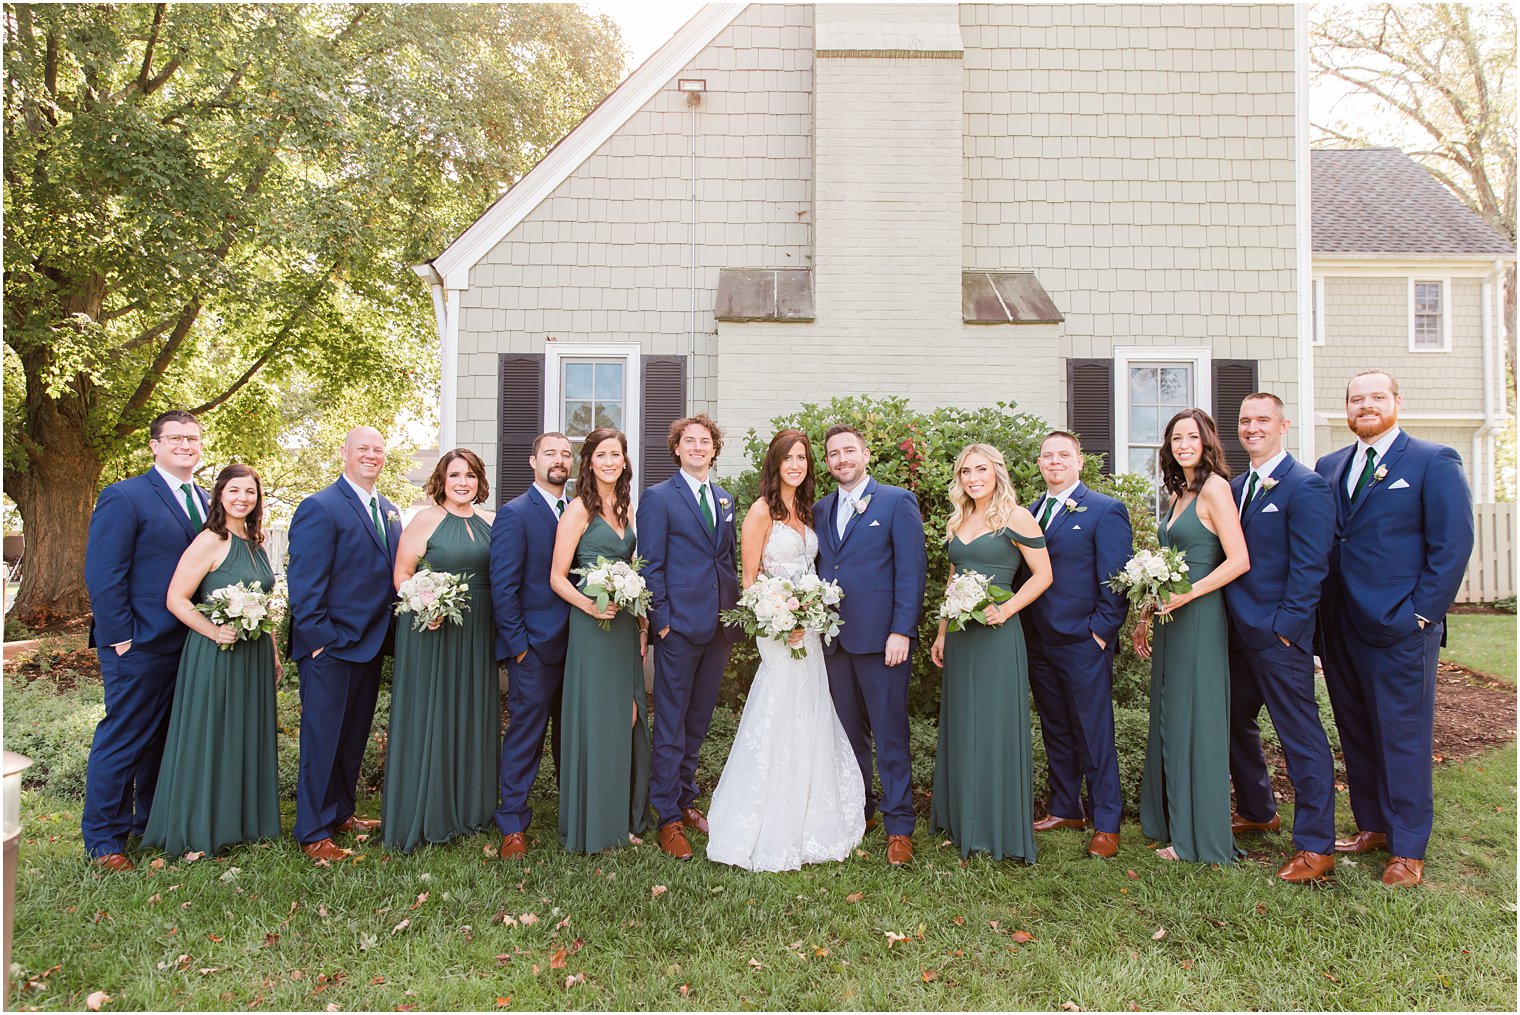 bridal party in navy and green attire poses with bride and groom on wedding day 